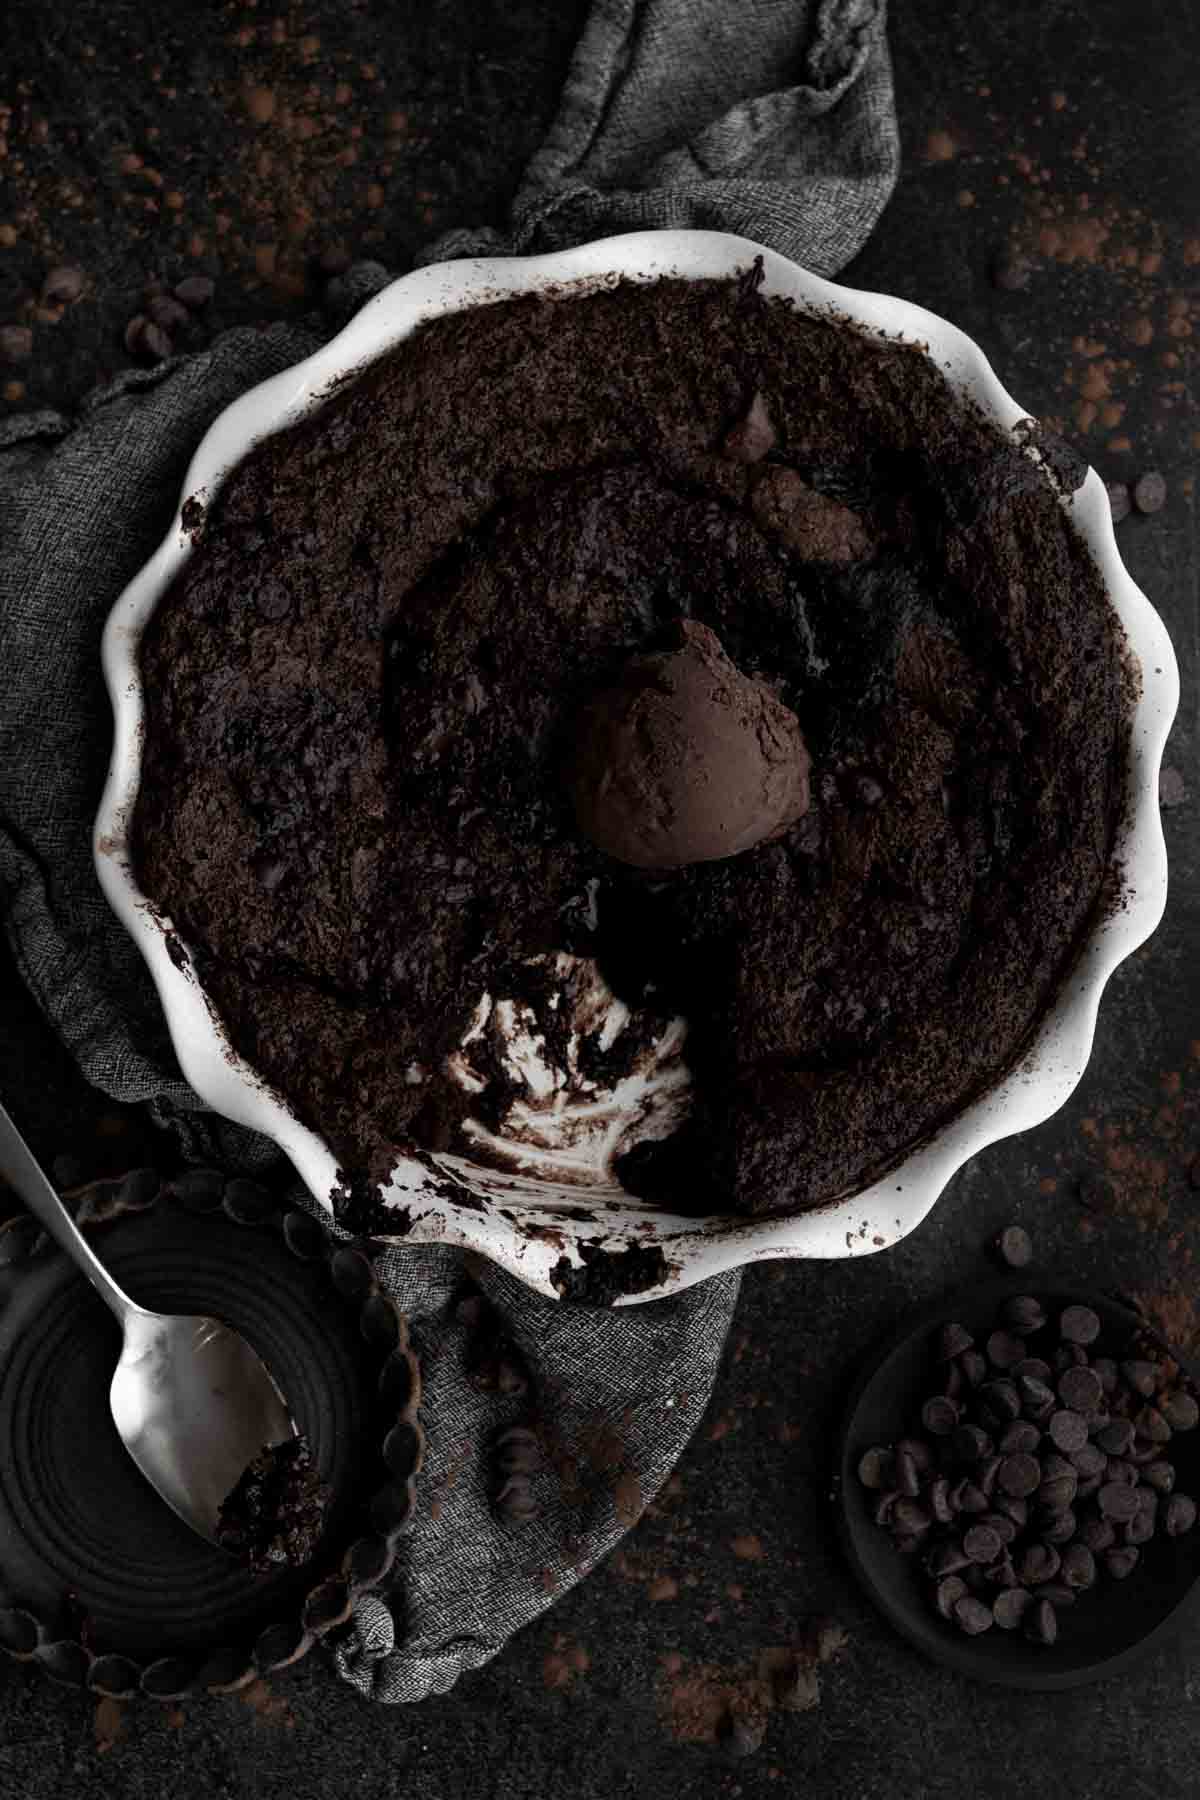 Chocolate ice cream tops a Chocolate Cobbler in a dish.